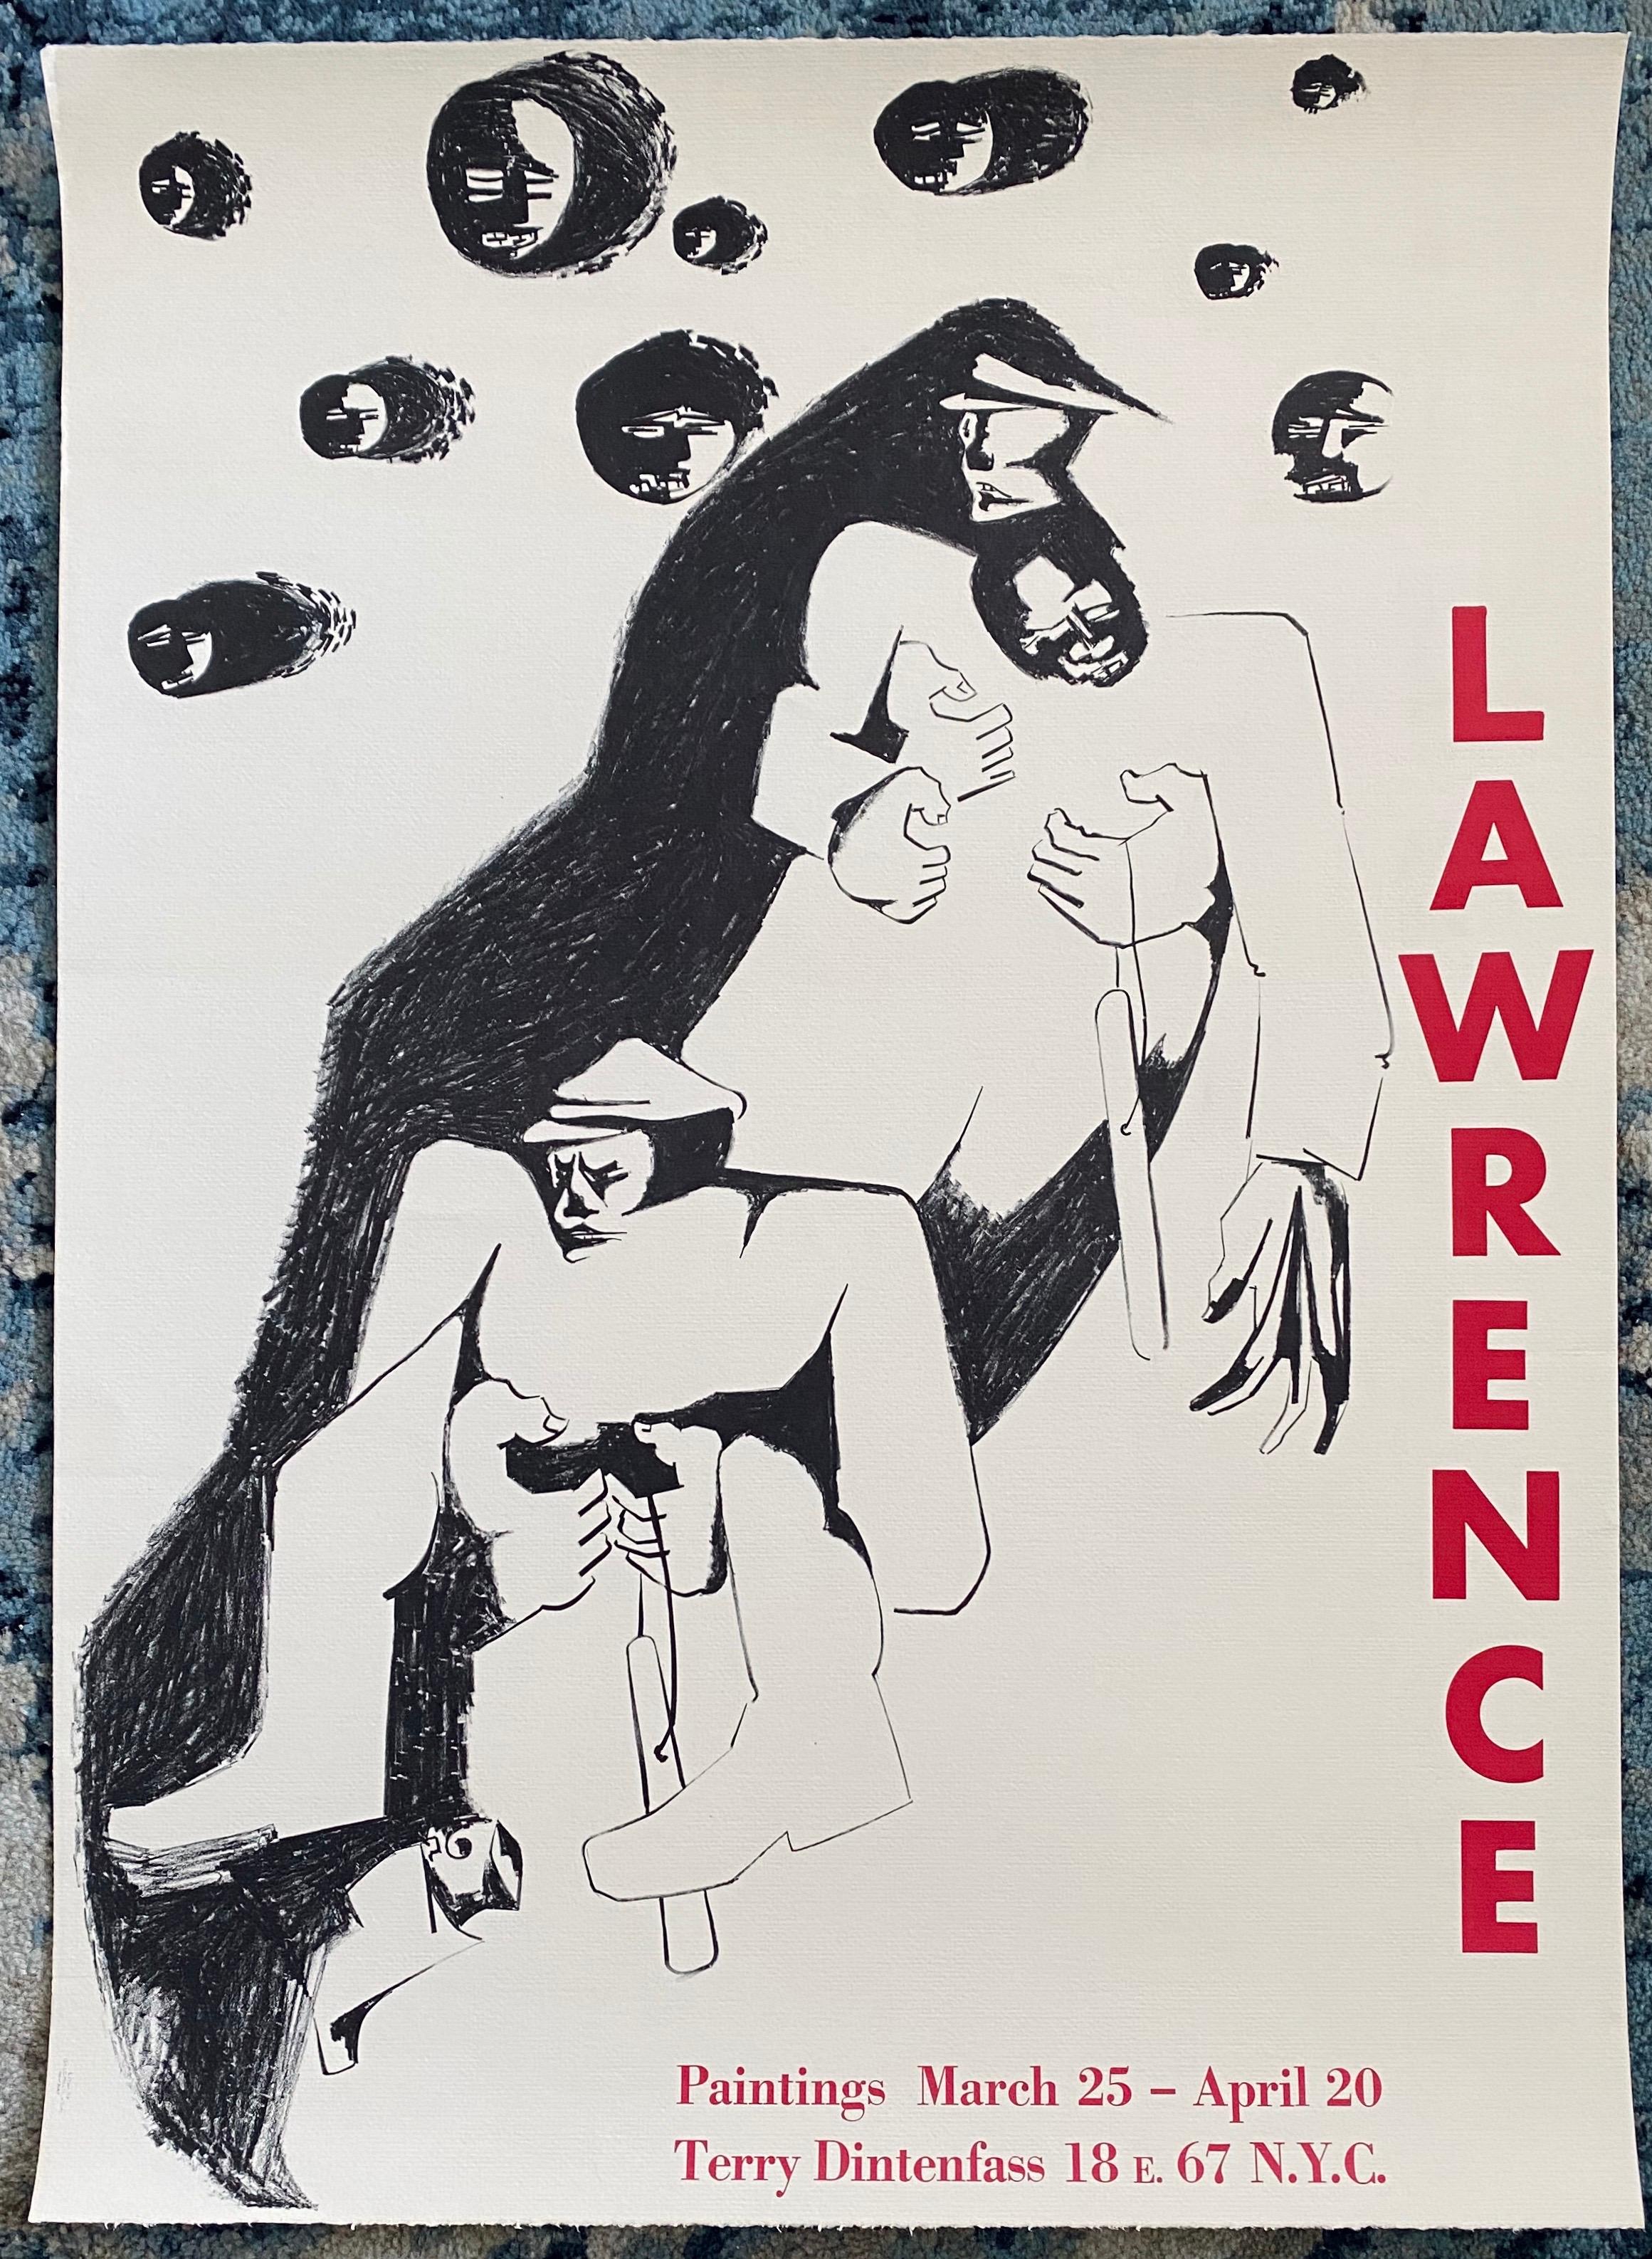 Vintage Lithograph Exhibition Poster Terry Dintenfass Gallery New York - Print by Jacob Lawrence